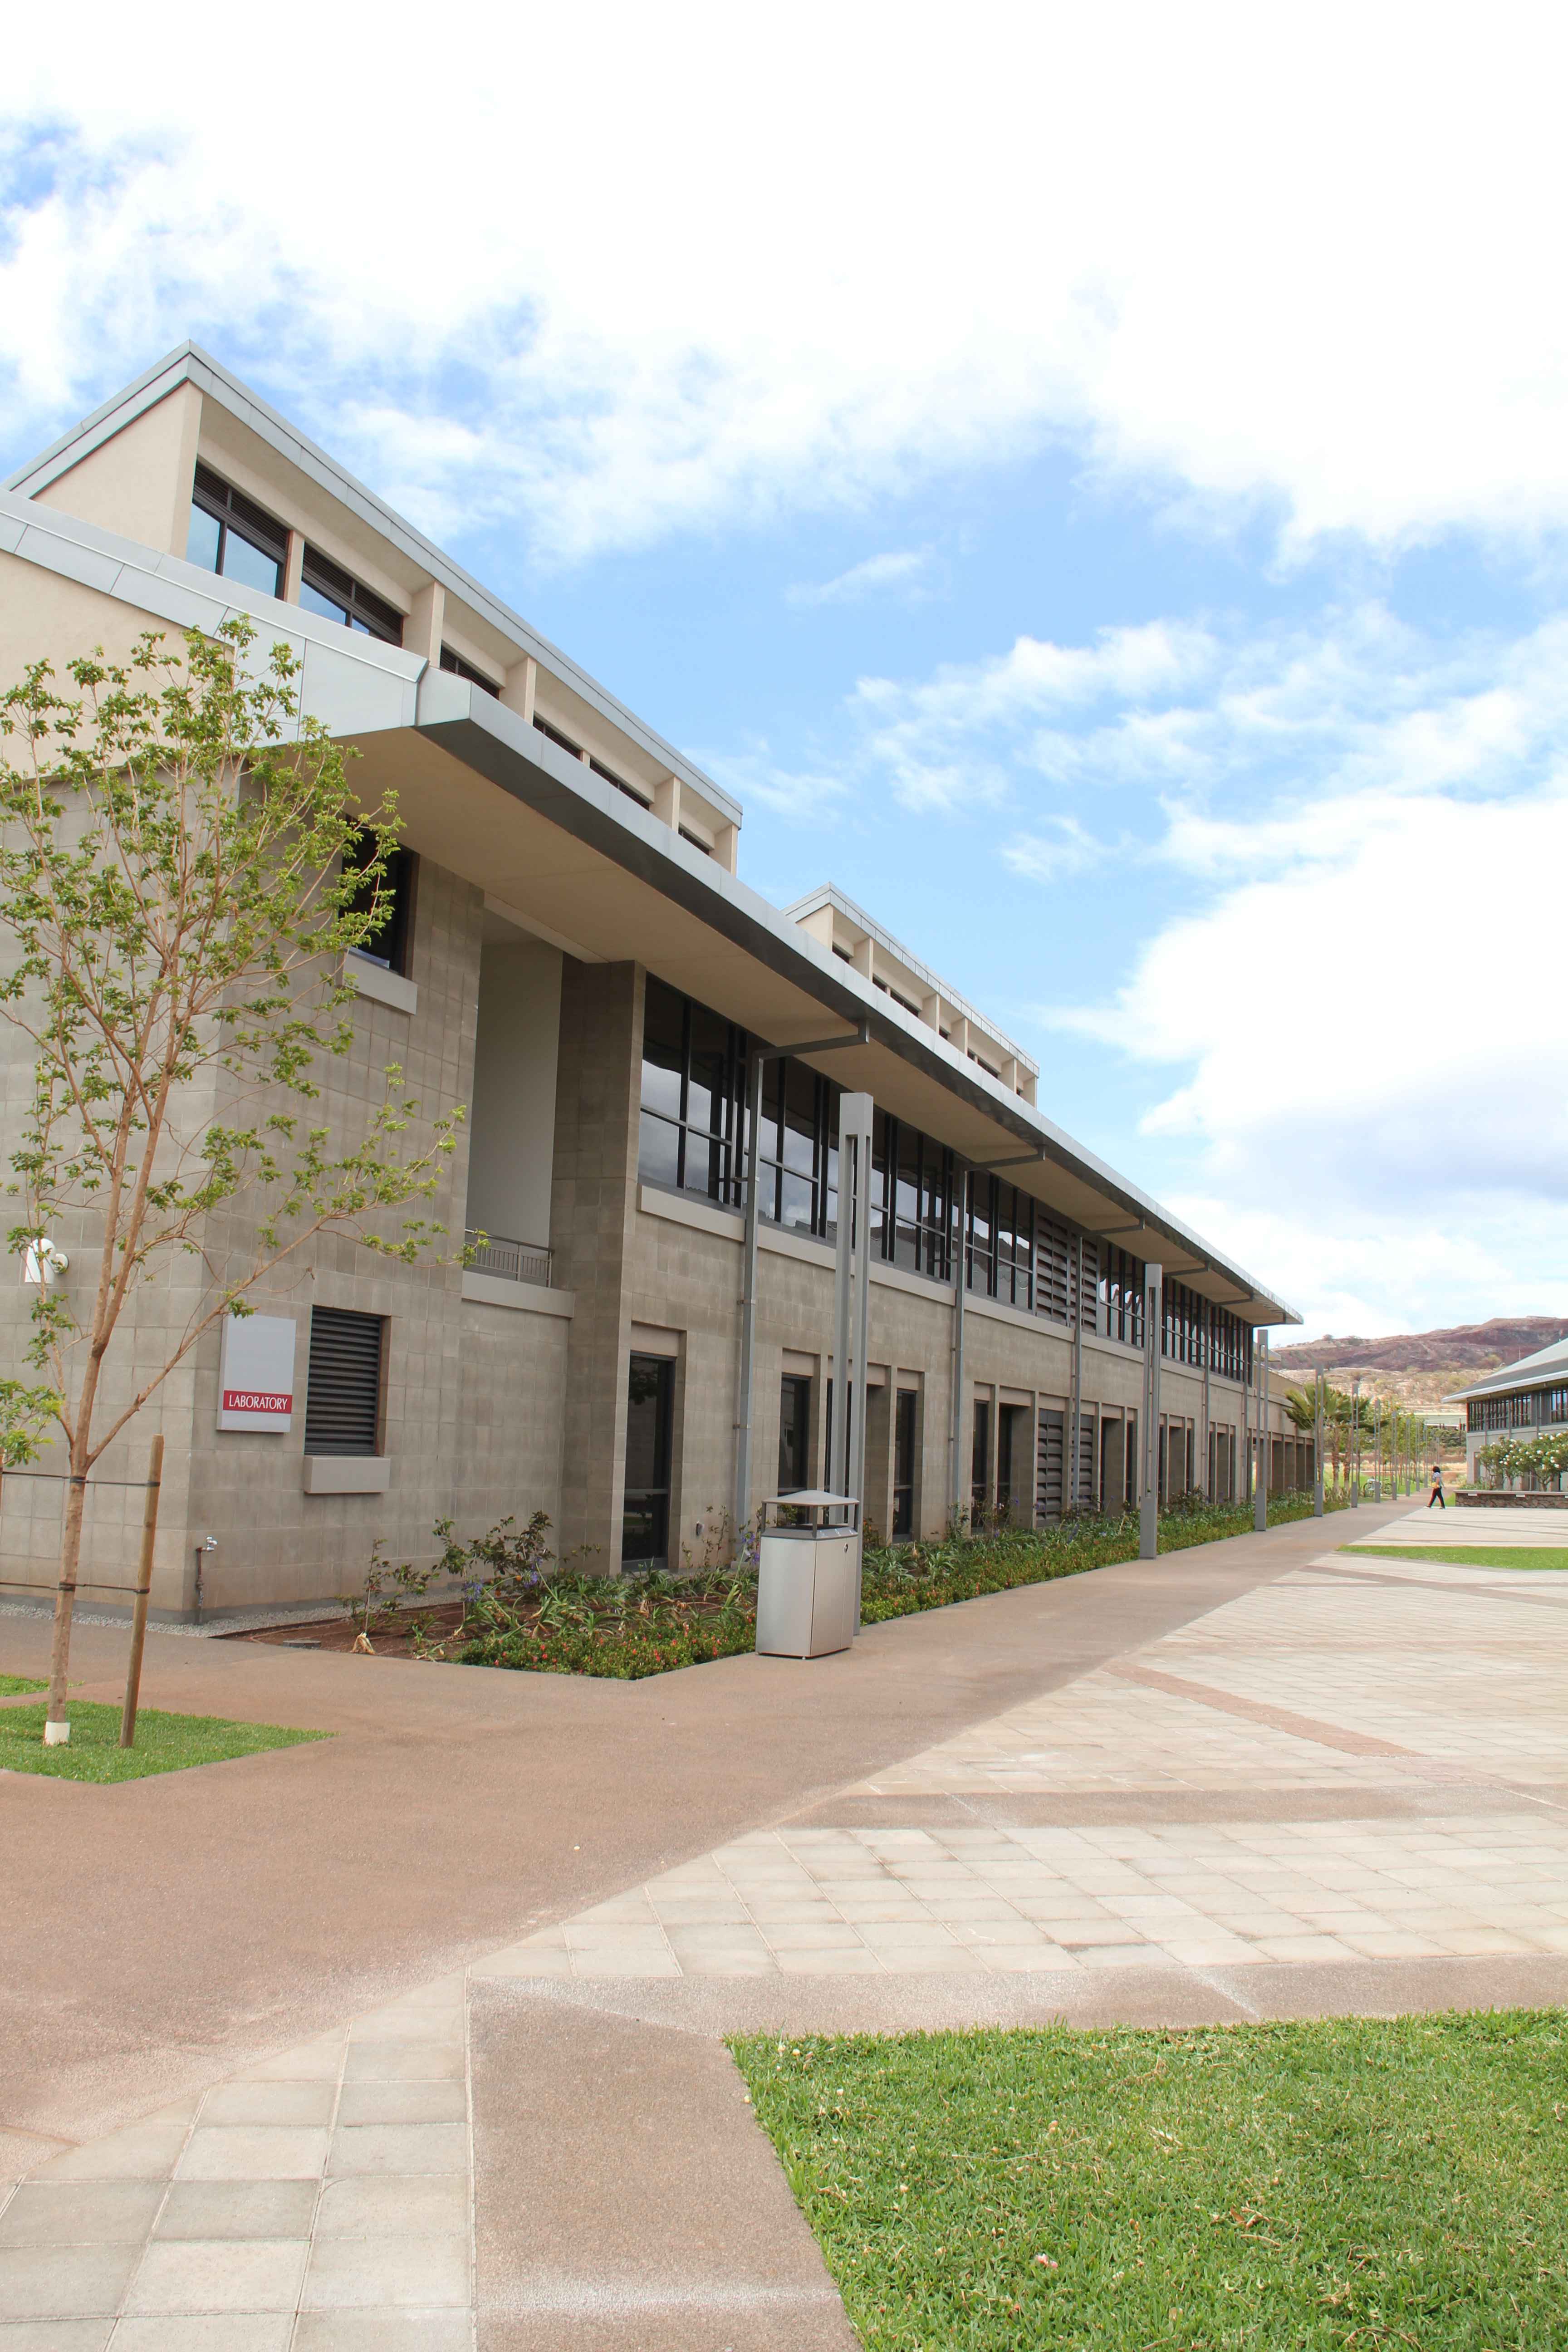 Photo of Building E on campus